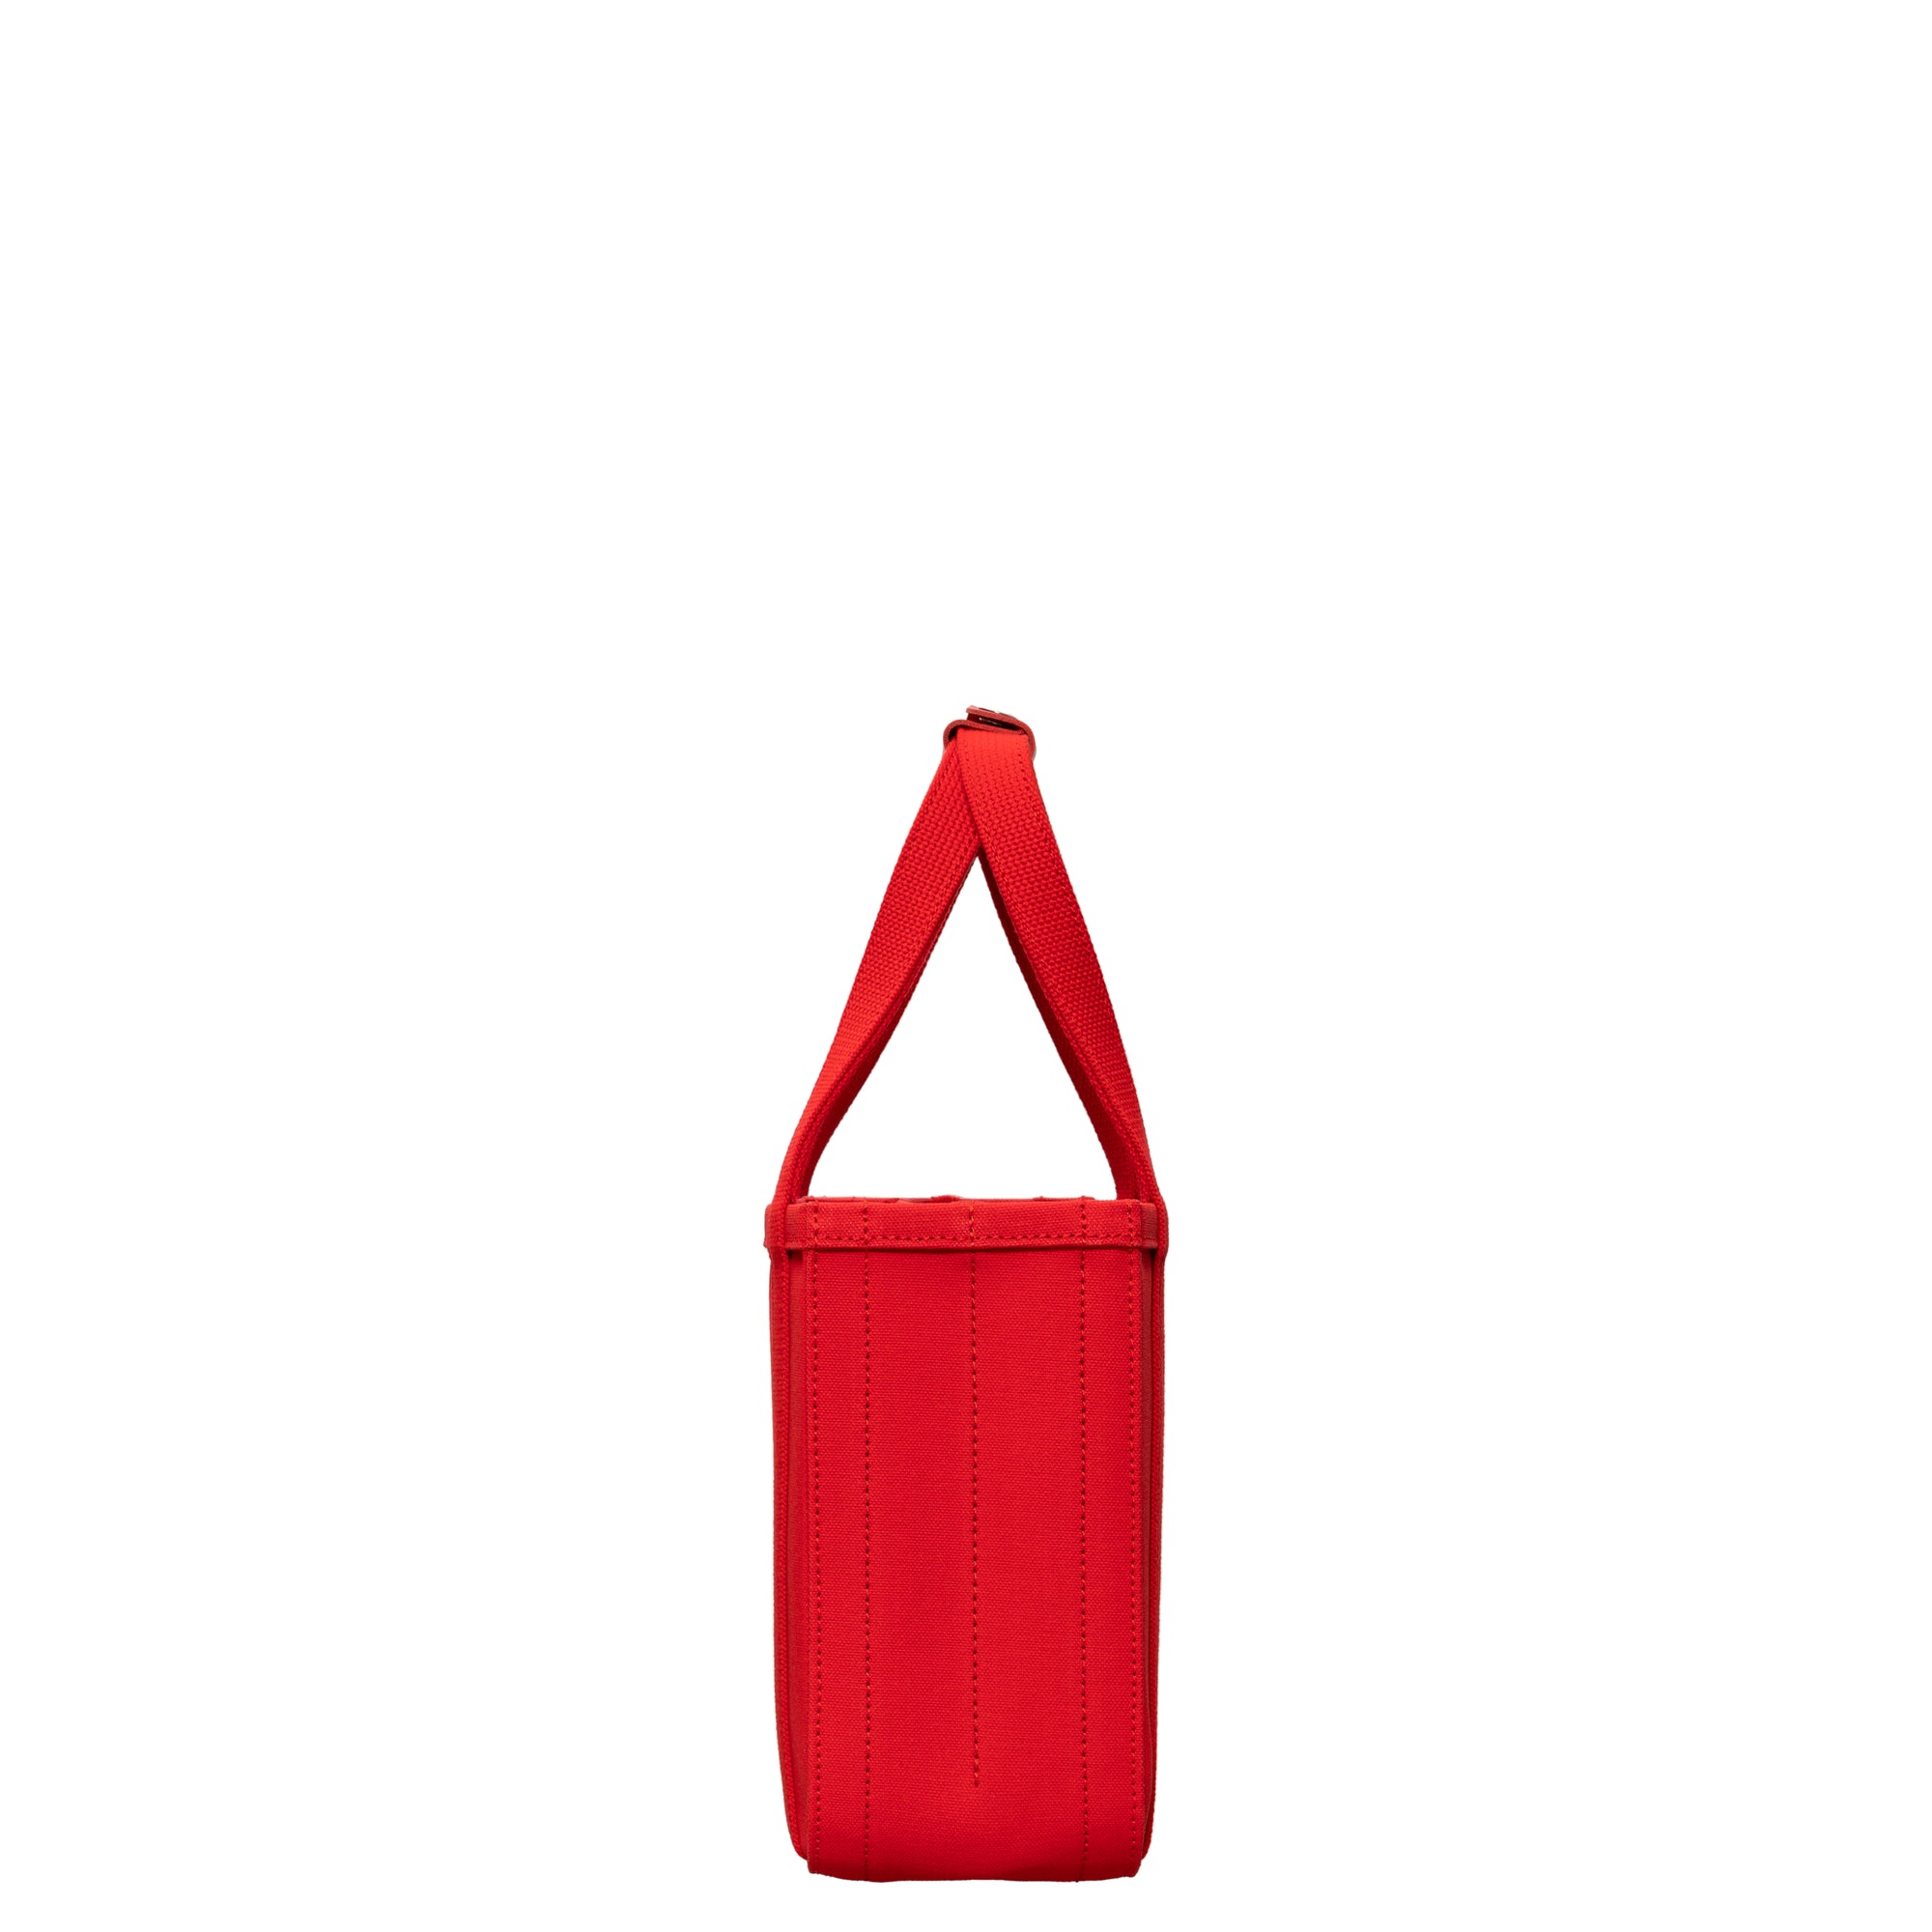 CHACOLI - 06 TOTE W280 X H240 X D120 - (RED) view 2